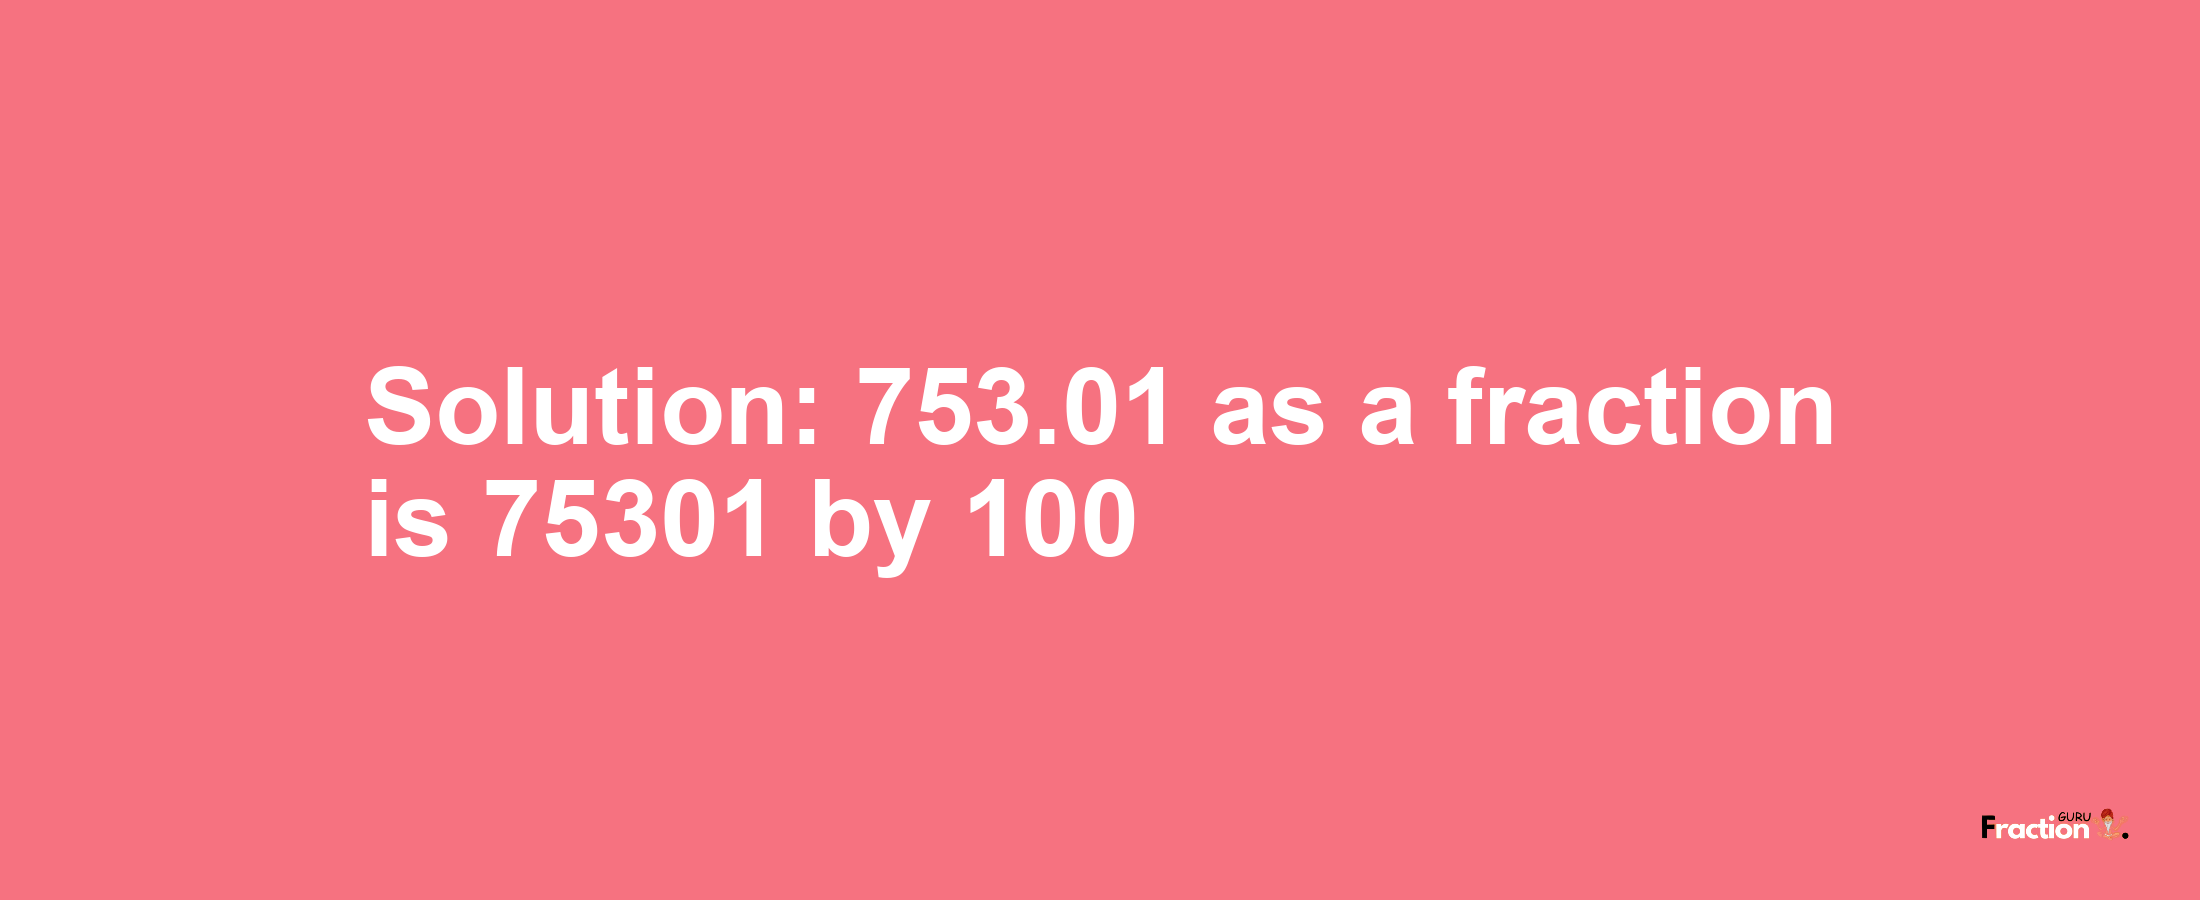 Solution:753.01 as a fraction is 75301/100